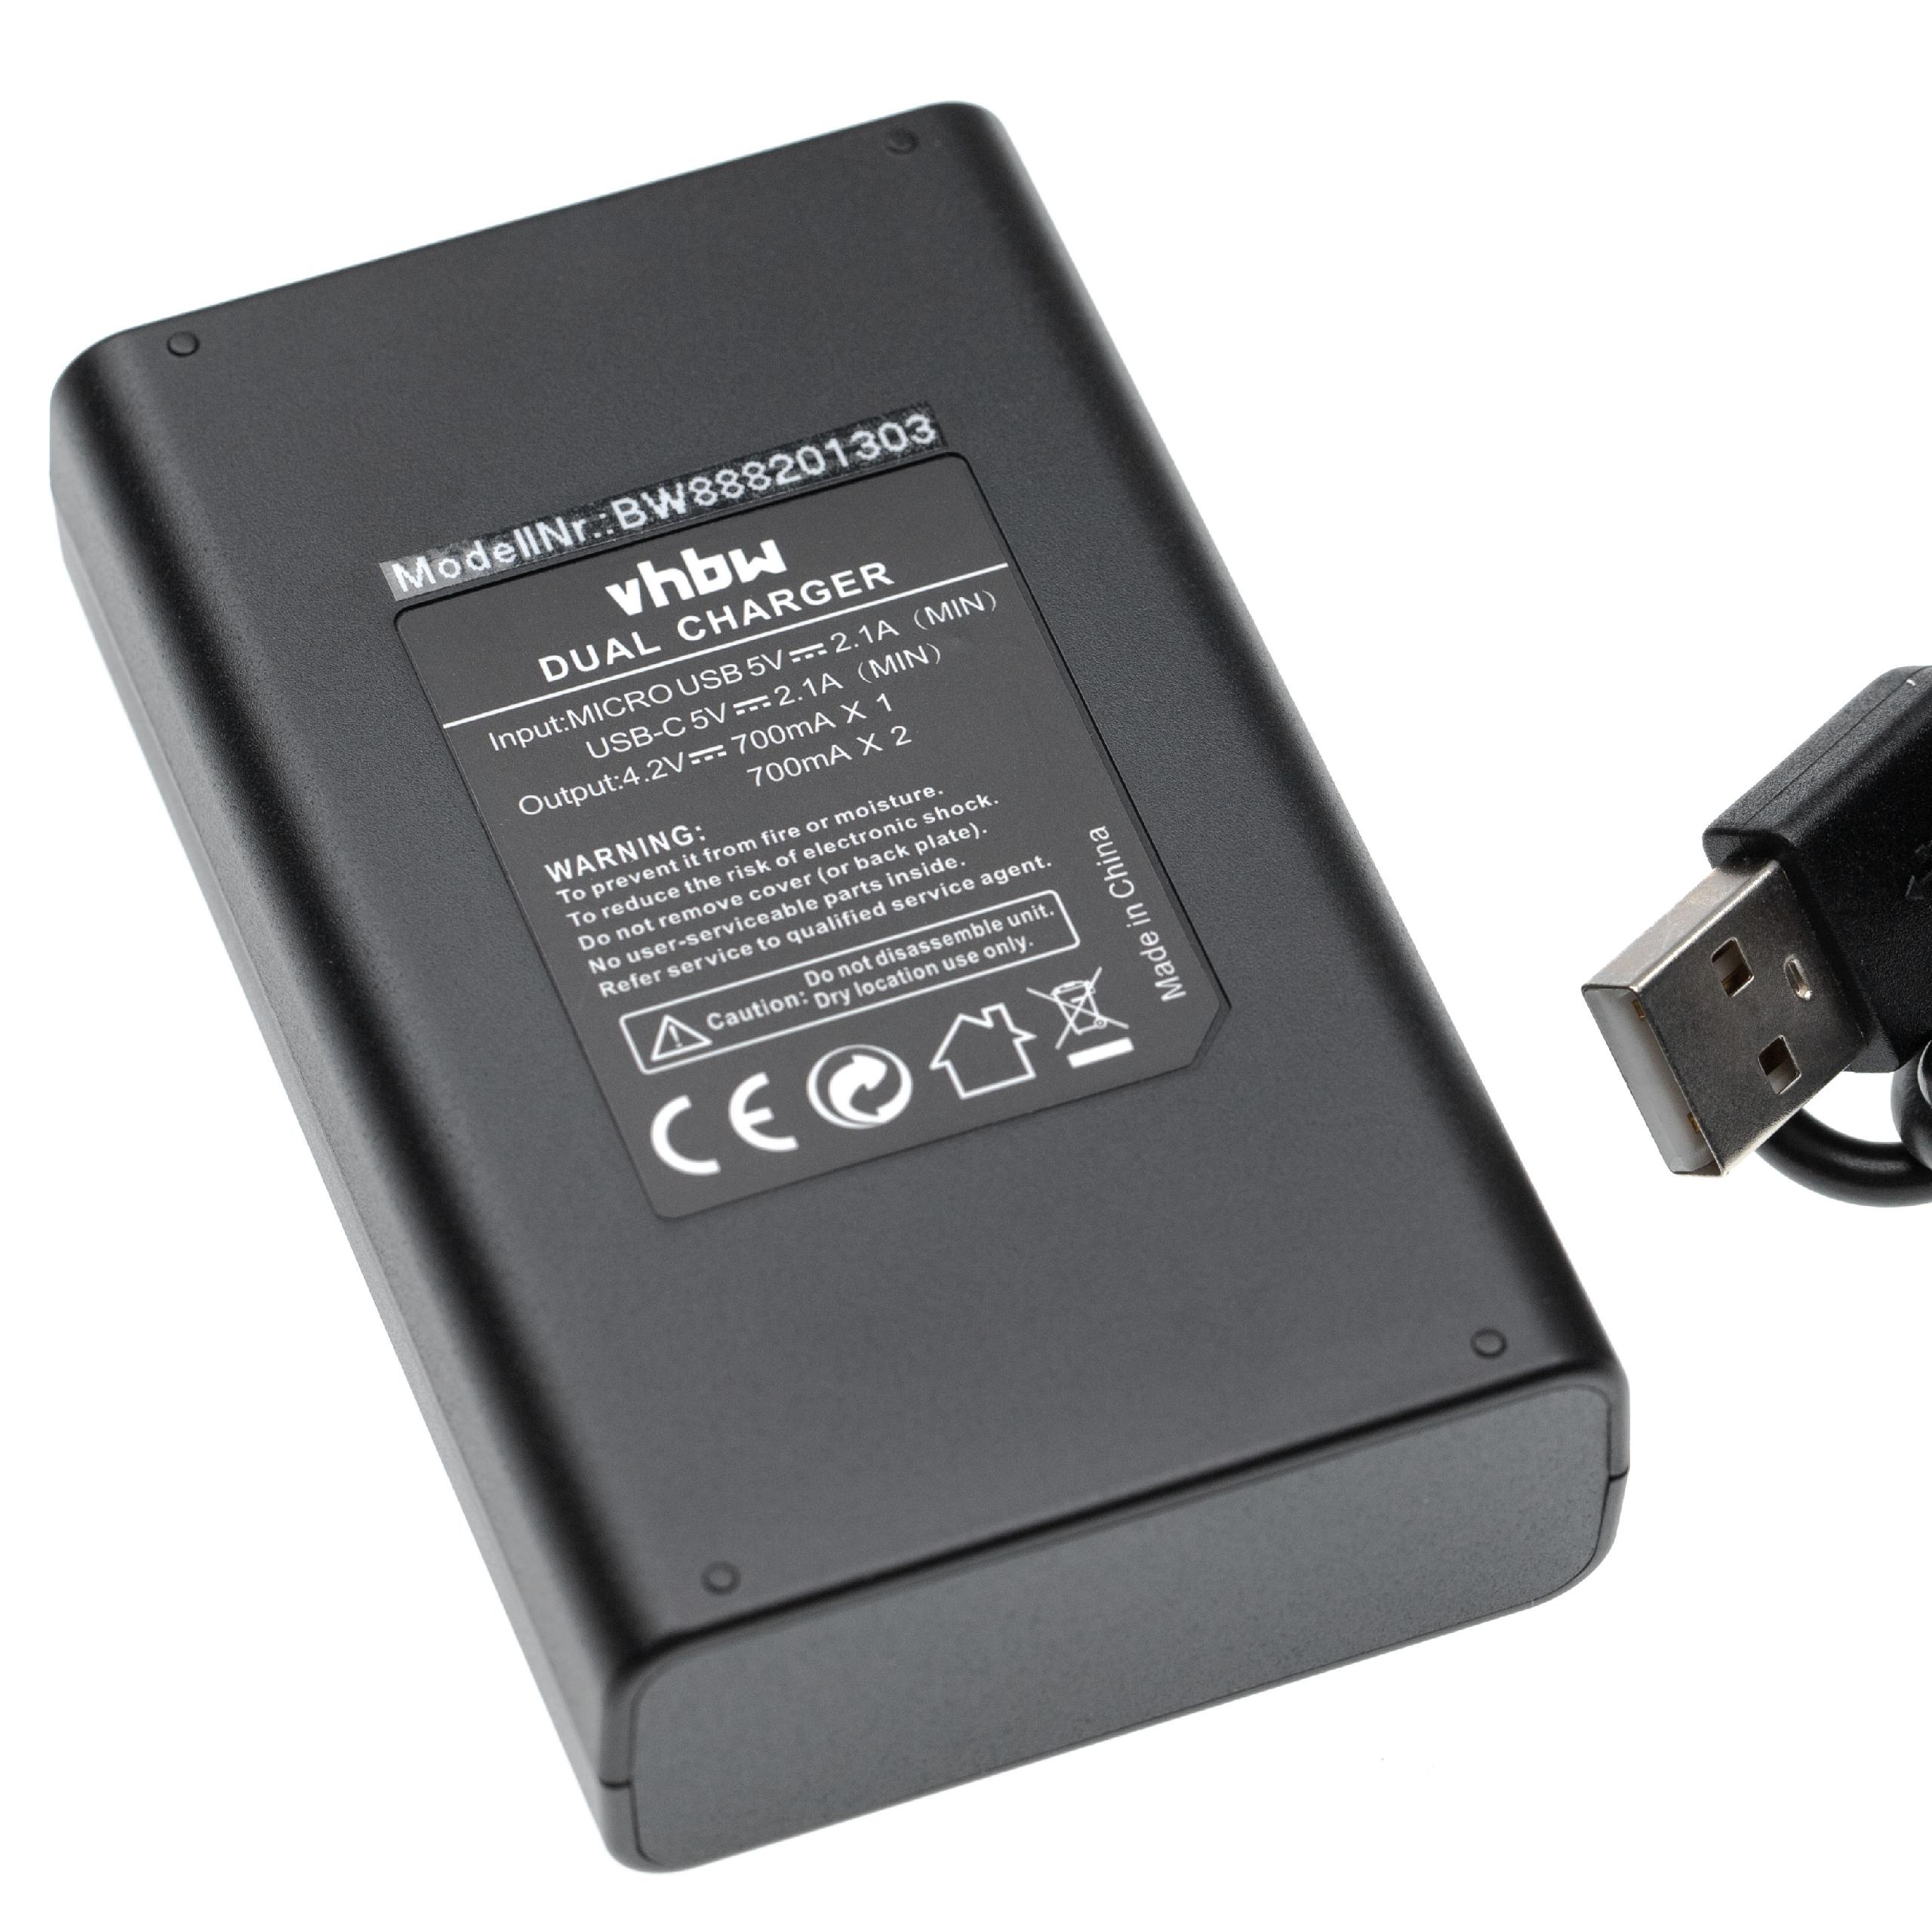 Battery Charger suitable for Coolpix 3700 Camera etc. - 0.7 A, 4.2 V